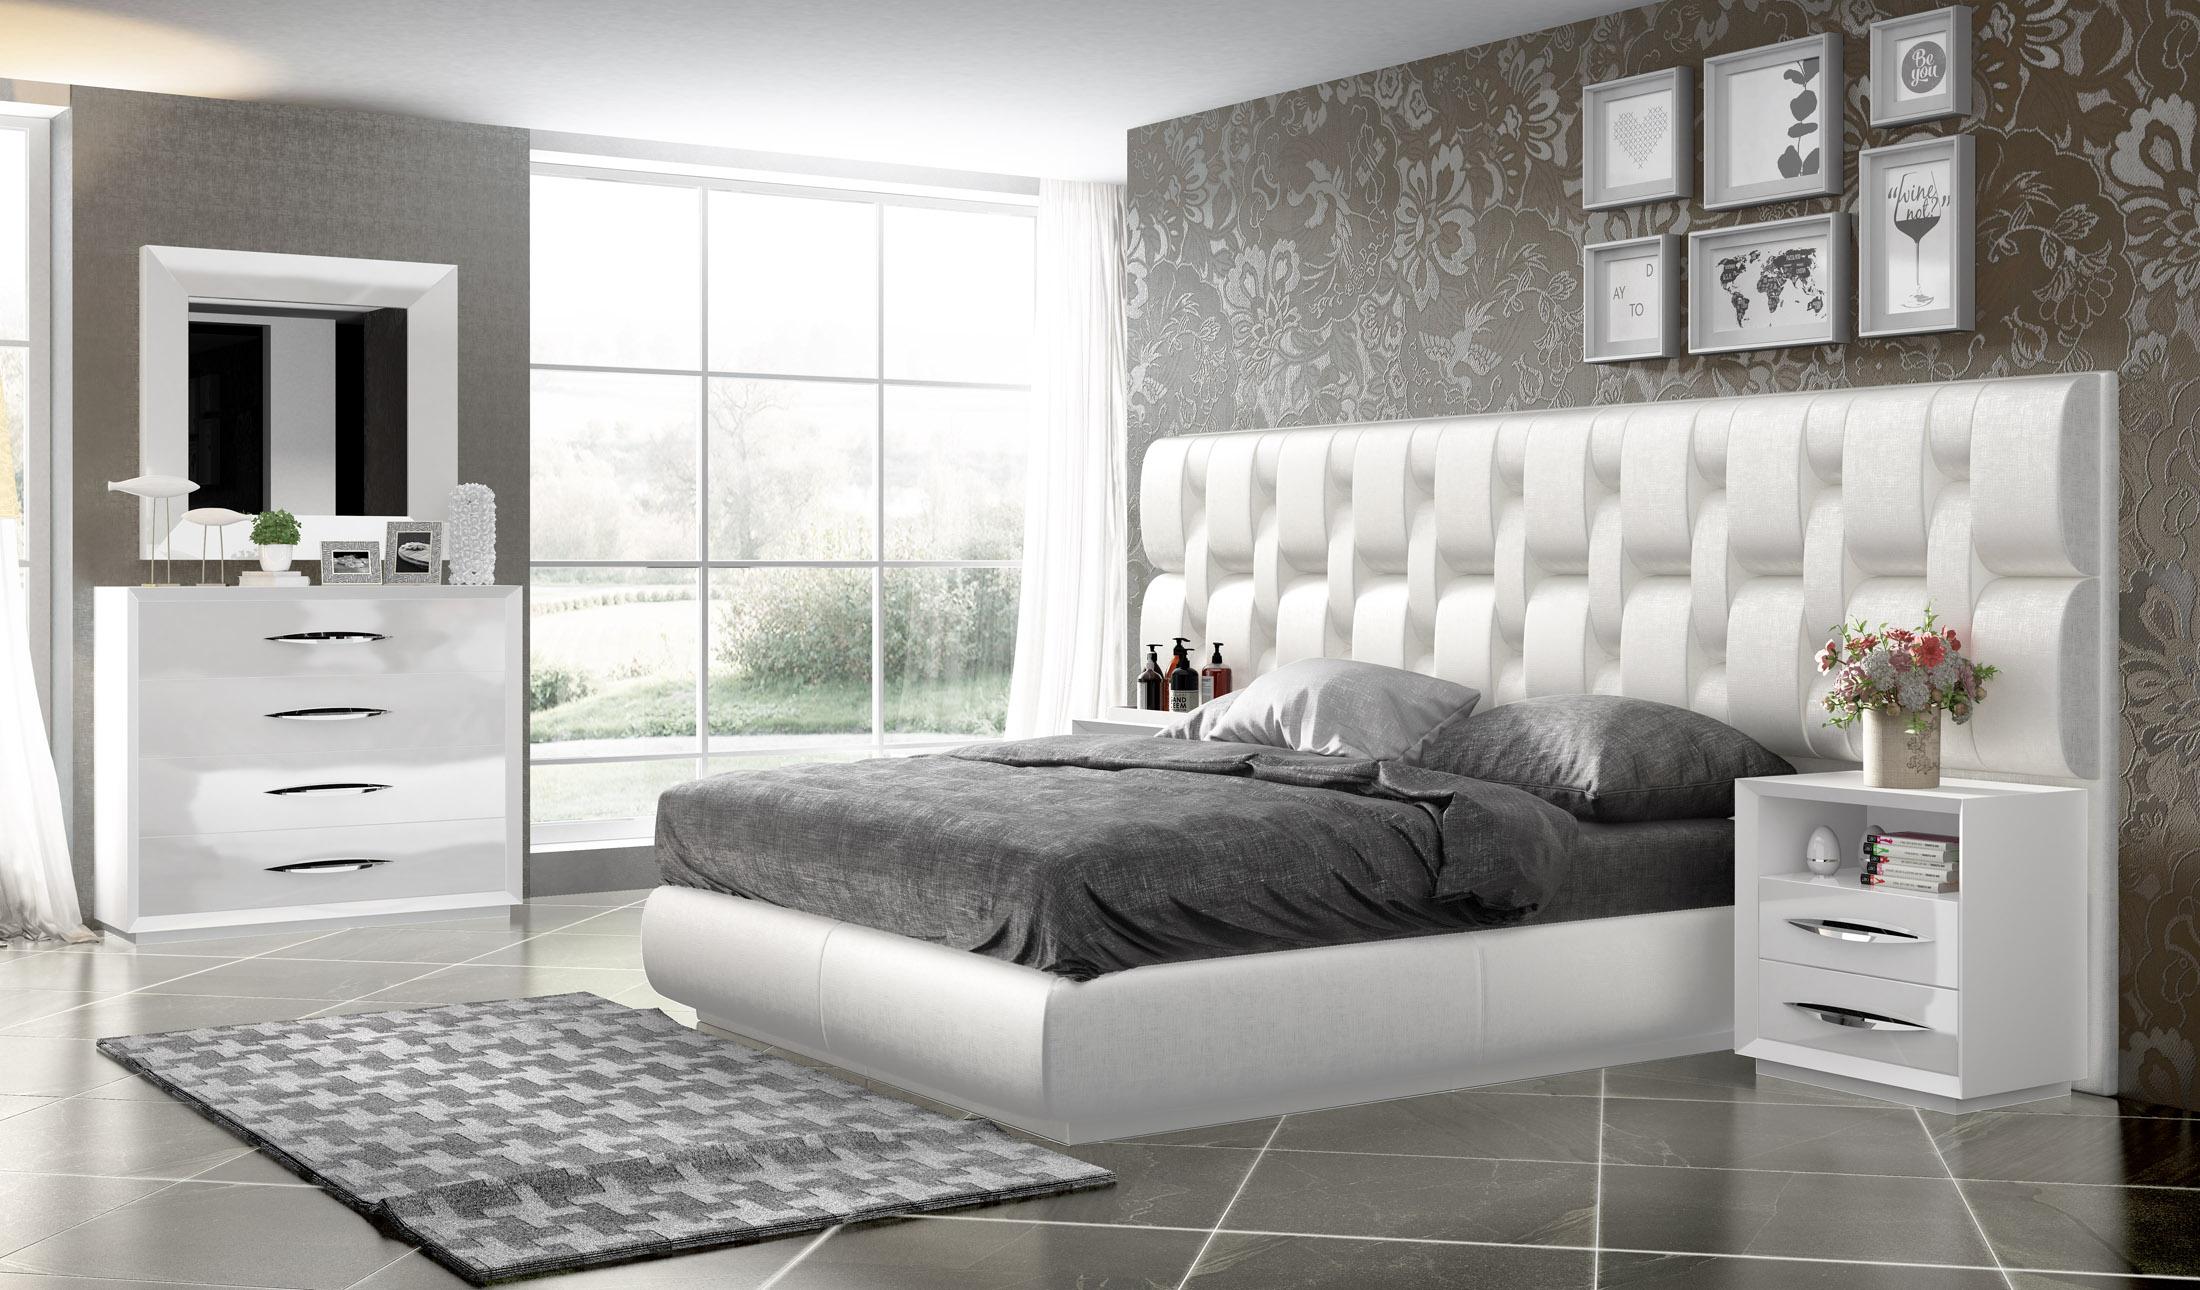 

    
Glam Glossy White King Bedroom Set 5P MADE IN SPAIN Contemporary ESF Emporio
